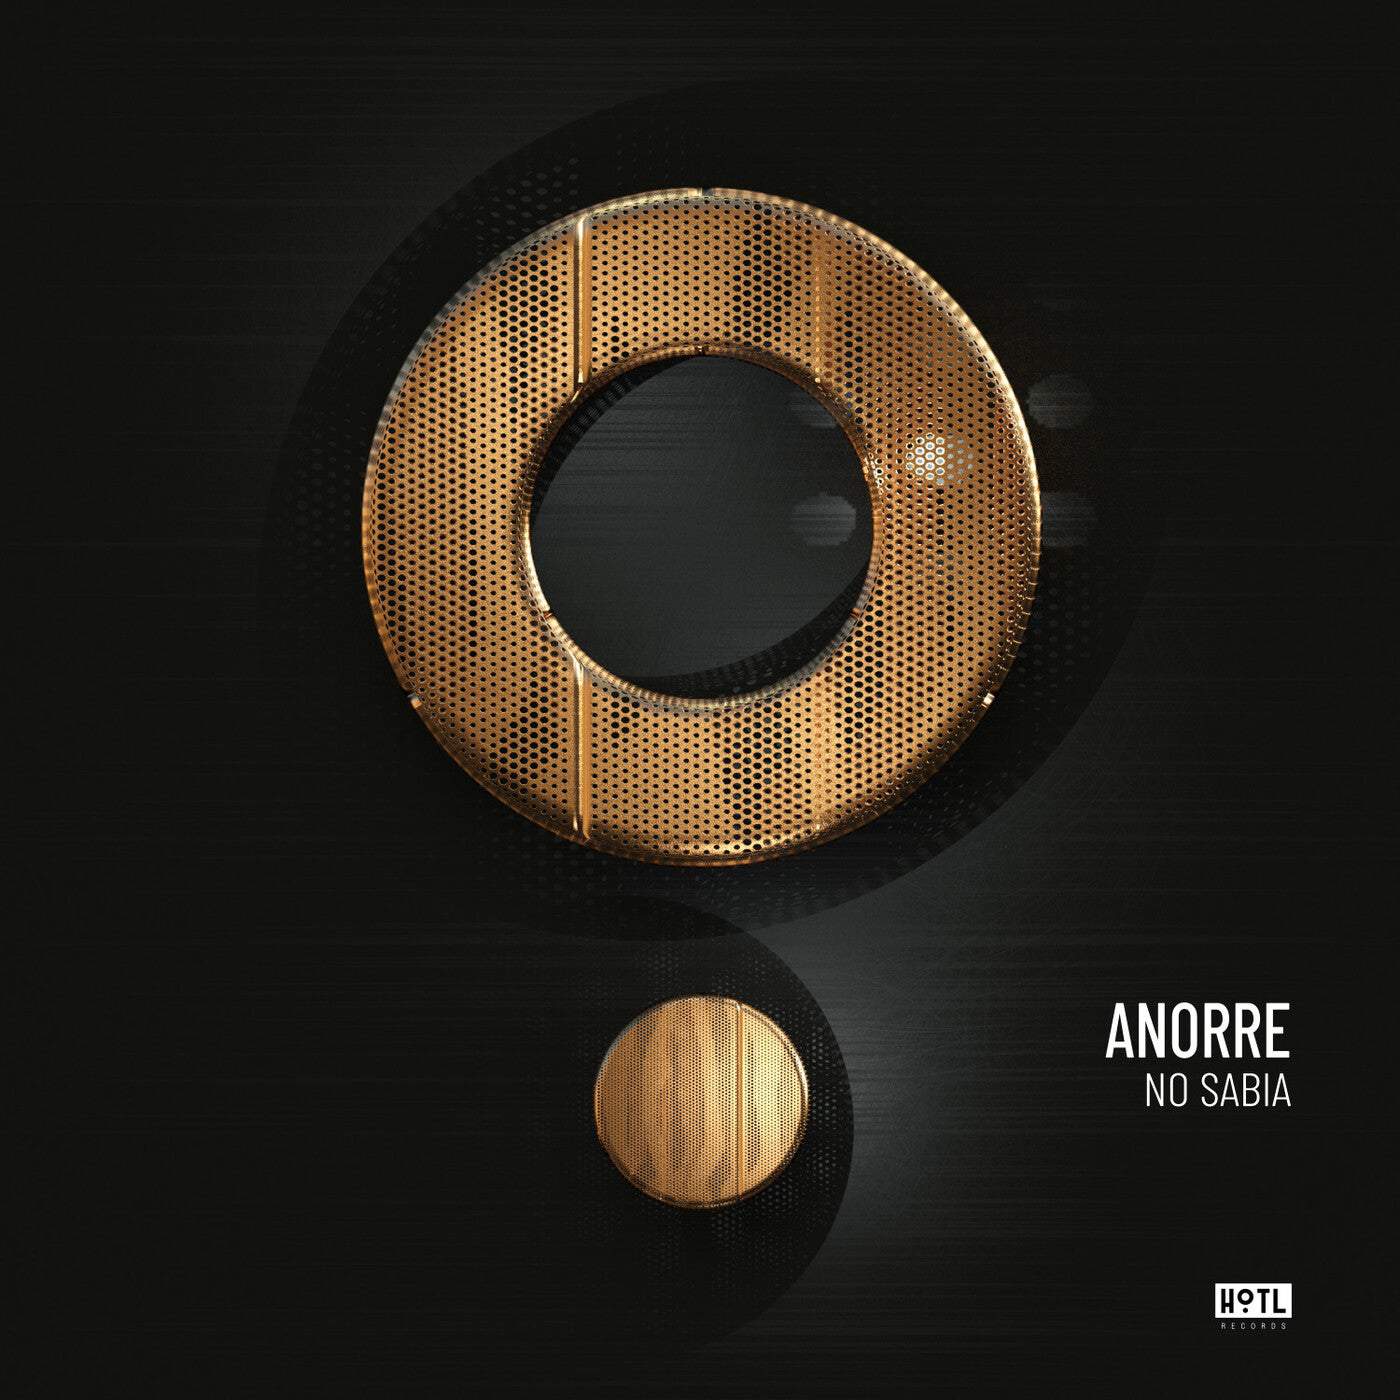 image cover: No Sabia by Anorre on HoTL Records